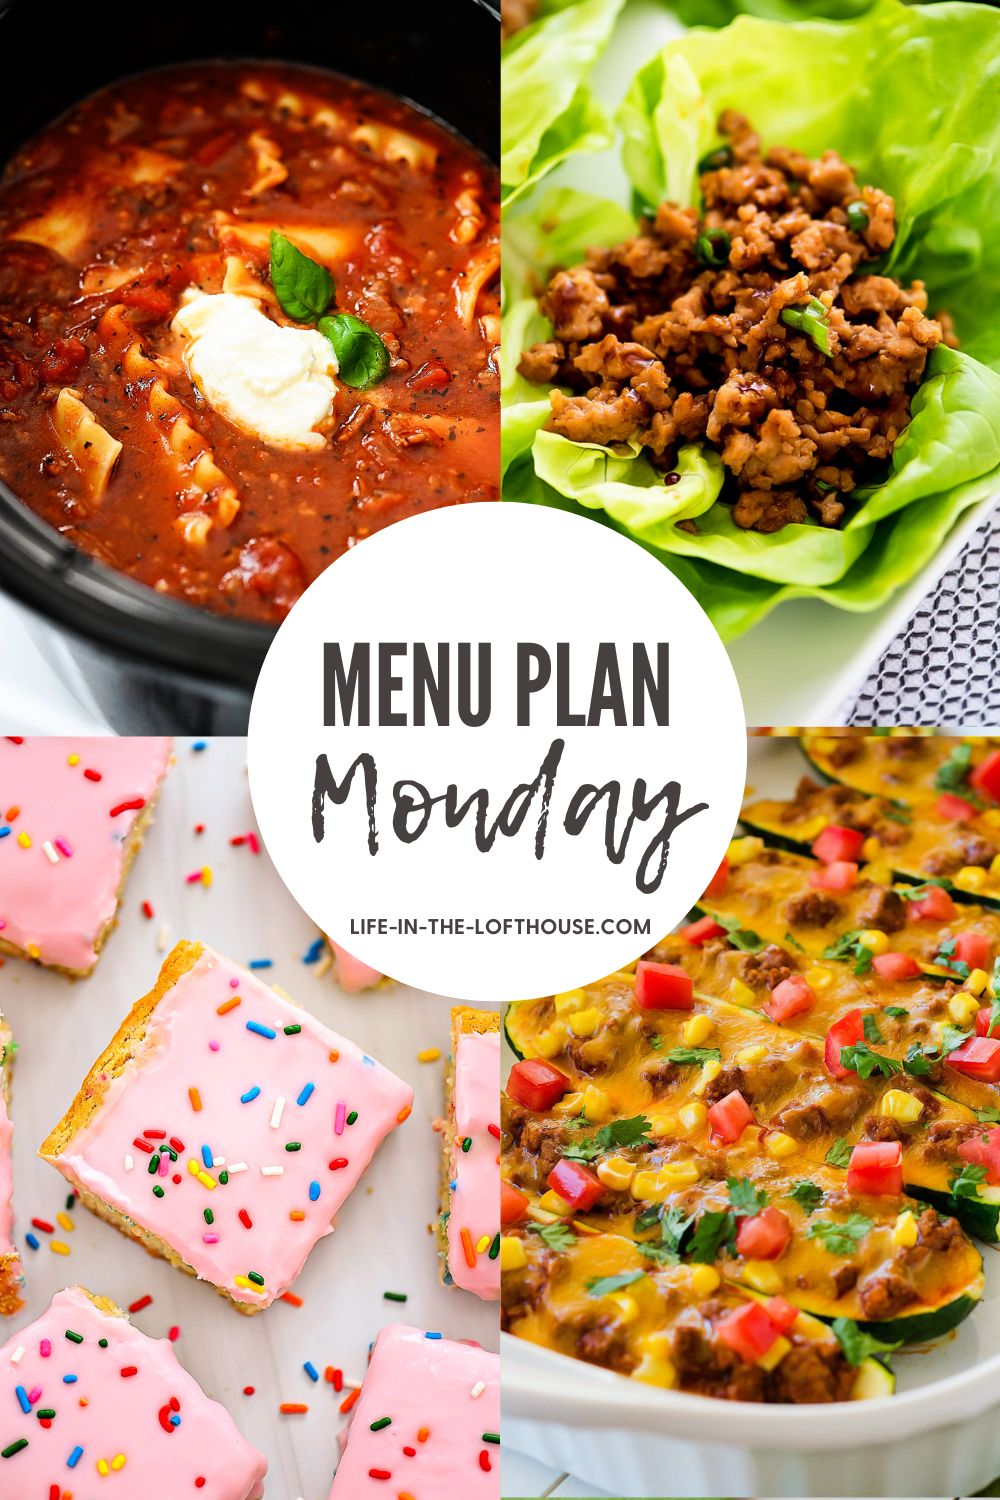 Menu Plan Monday is a list of recipes with six dinner ideas and one dessert.